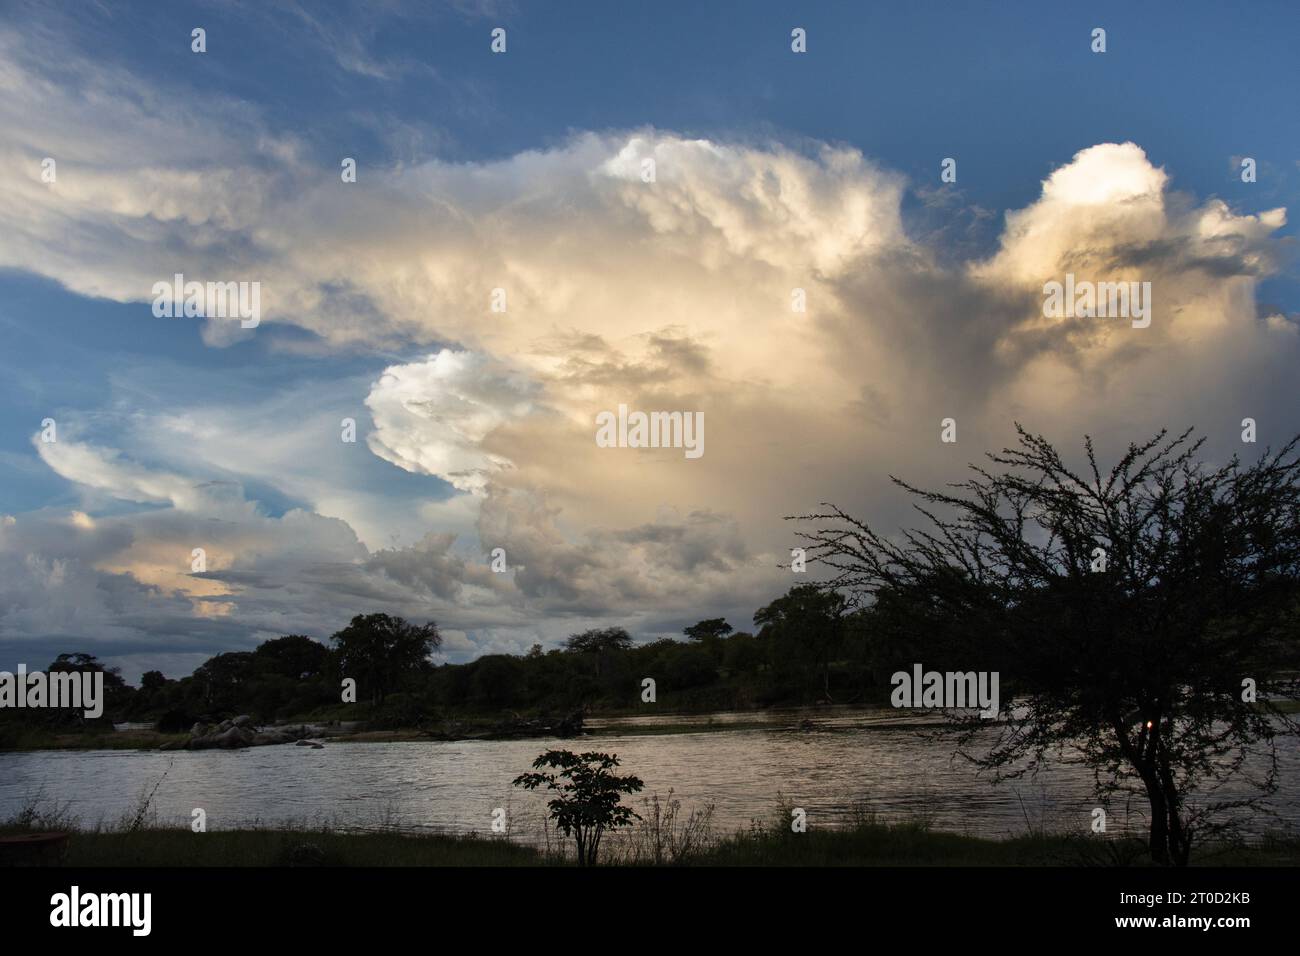 A Cumulonimbus storm cloud develops over Ruaha. Such storm clouds often develop on hot days and unleash powerful afternoon and evening deluges. Stock Photo